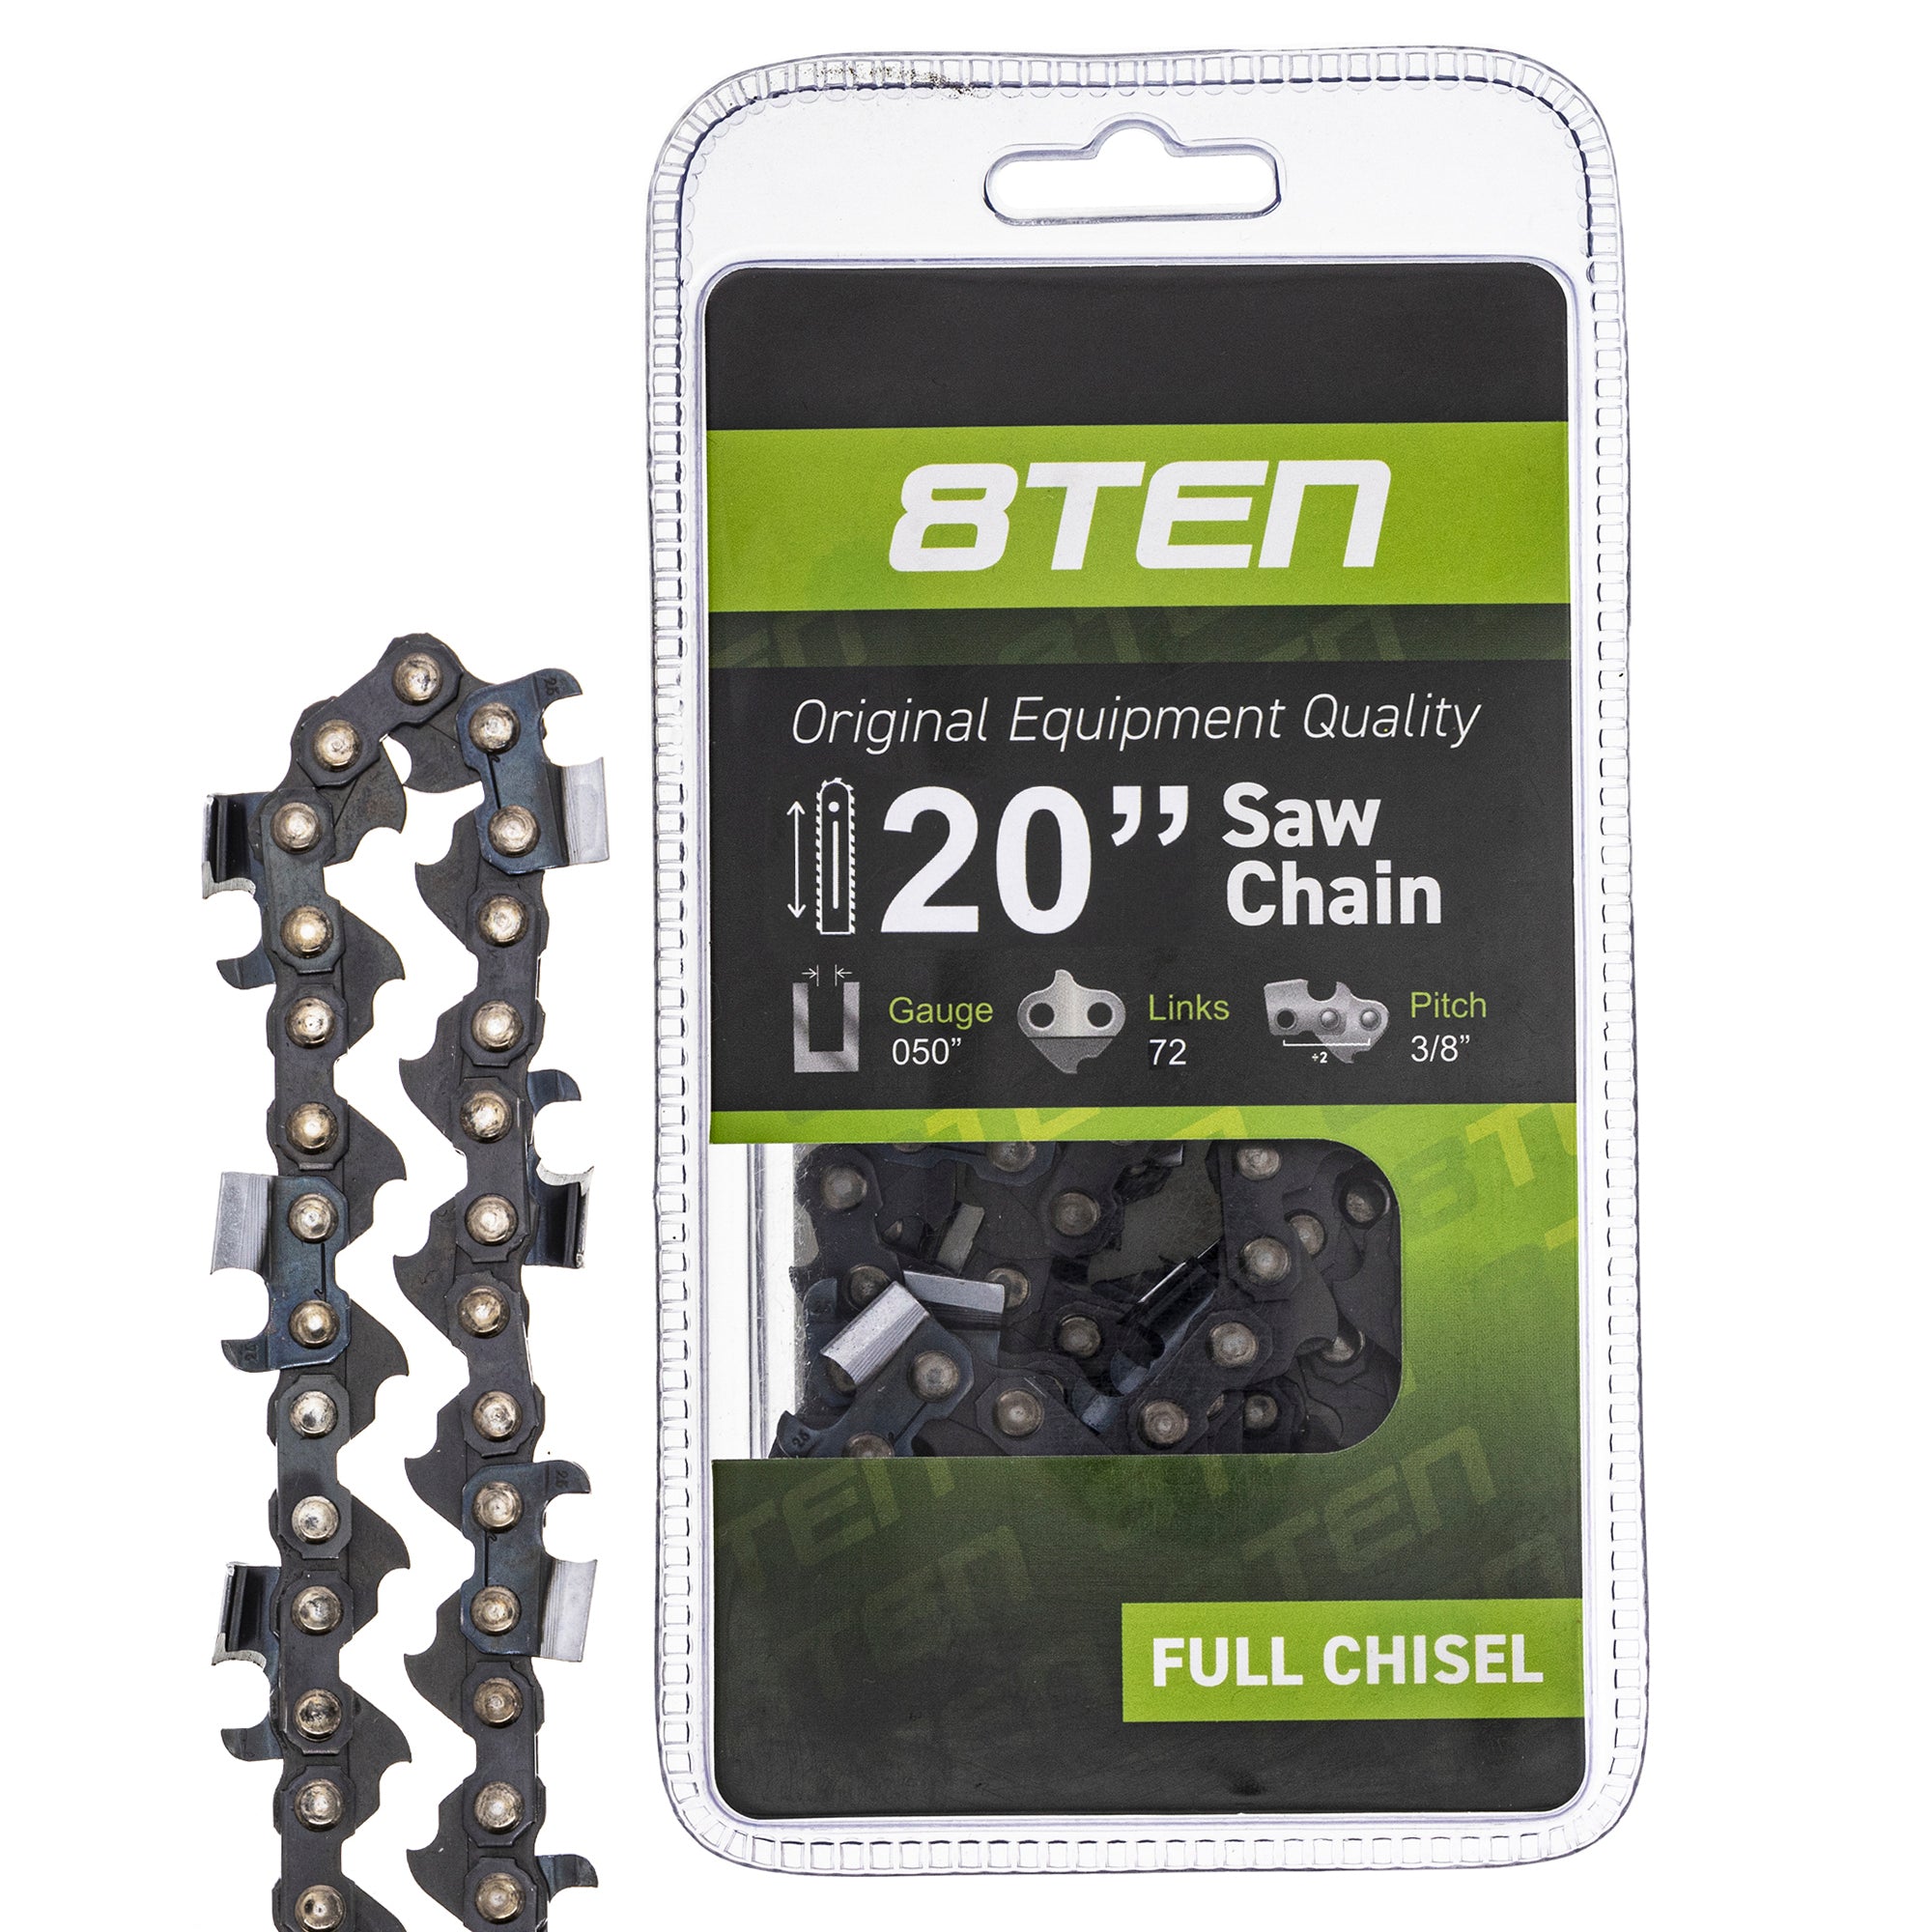 8TEN MK1002923 Chainsaw Bar & 2 Chain Kit for zOTHER Windsor